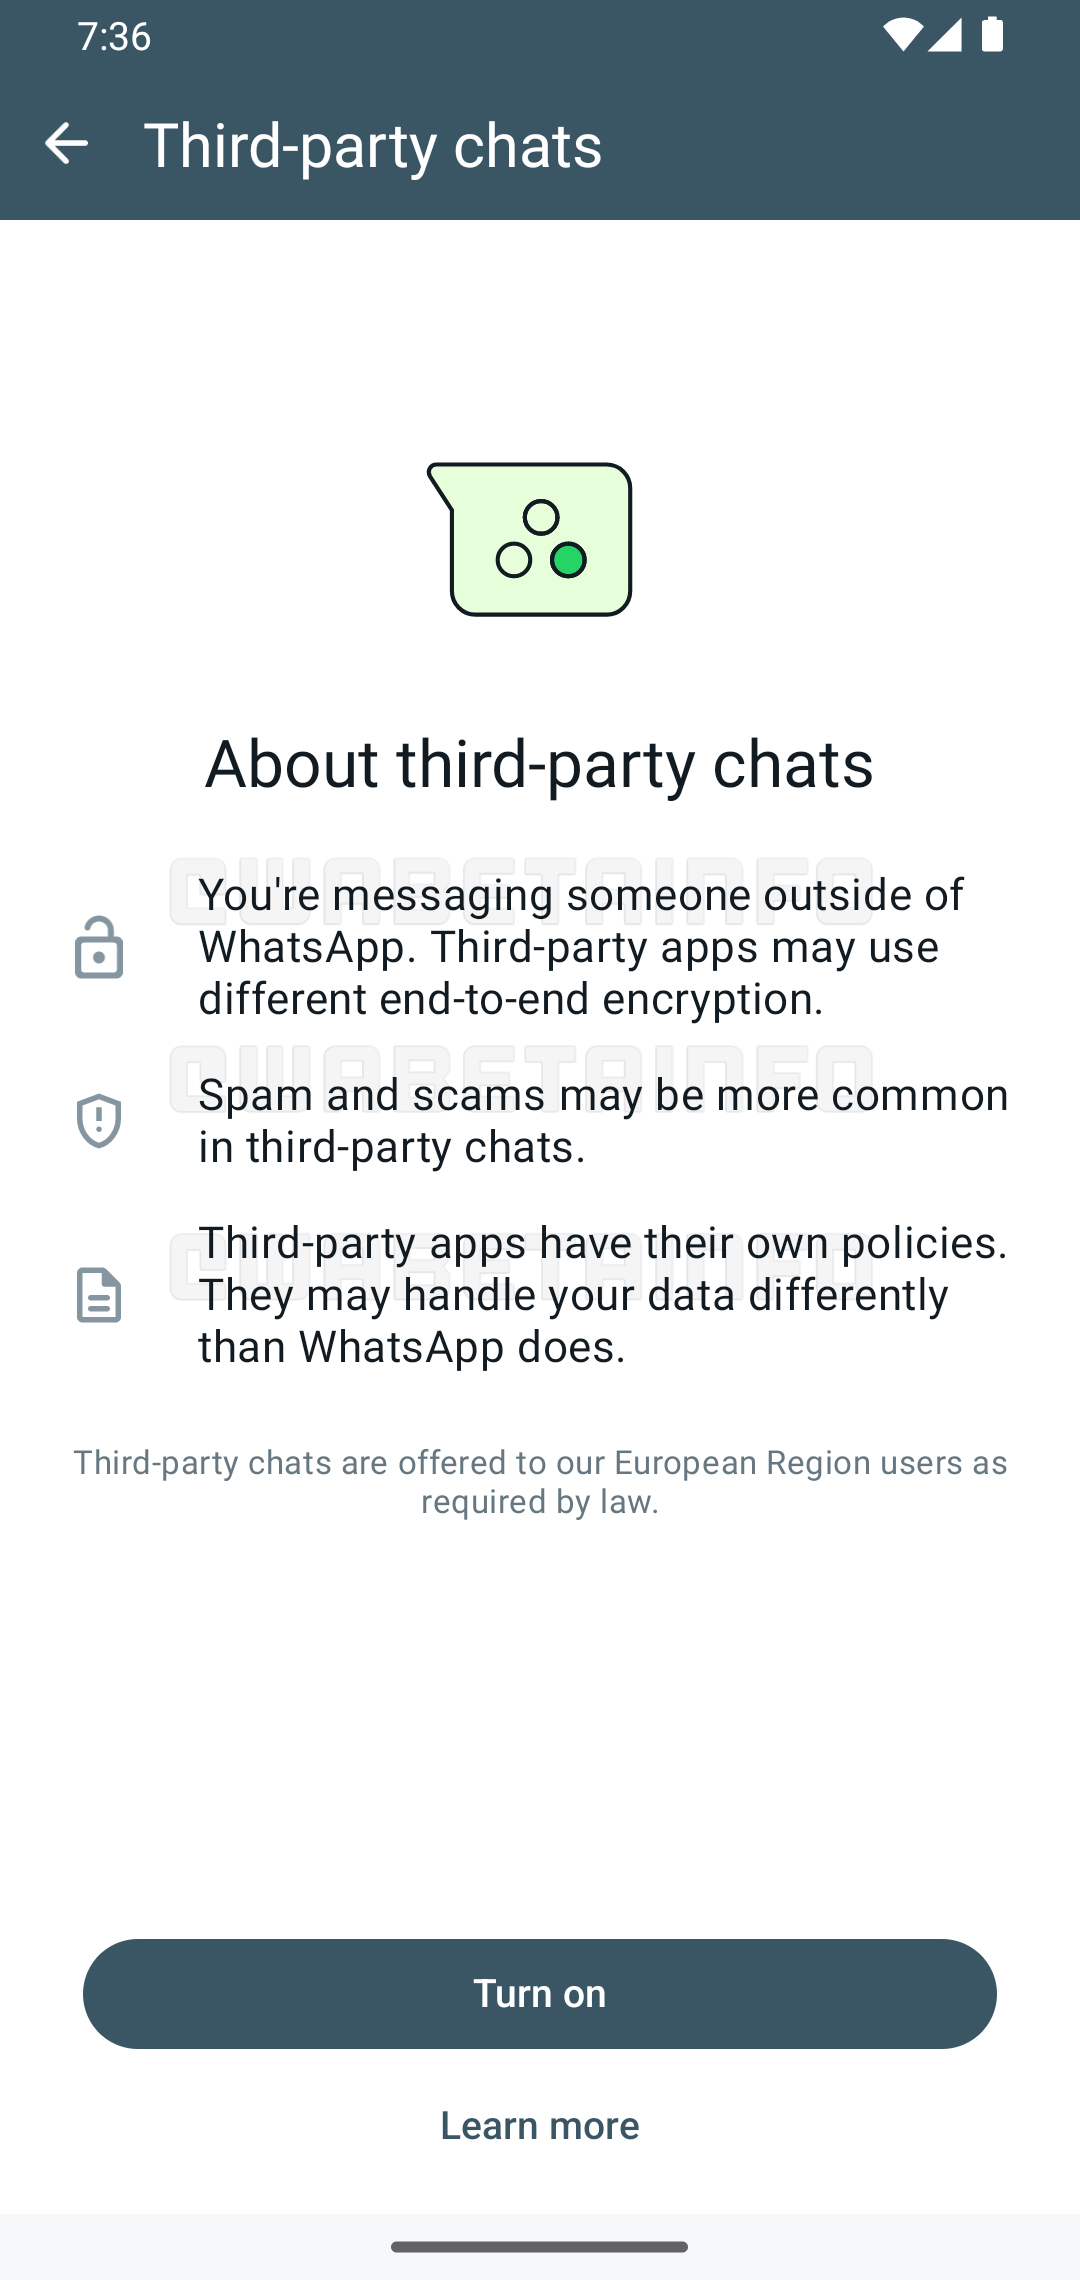 DMA Paving Way for Third-Party WhatsApp